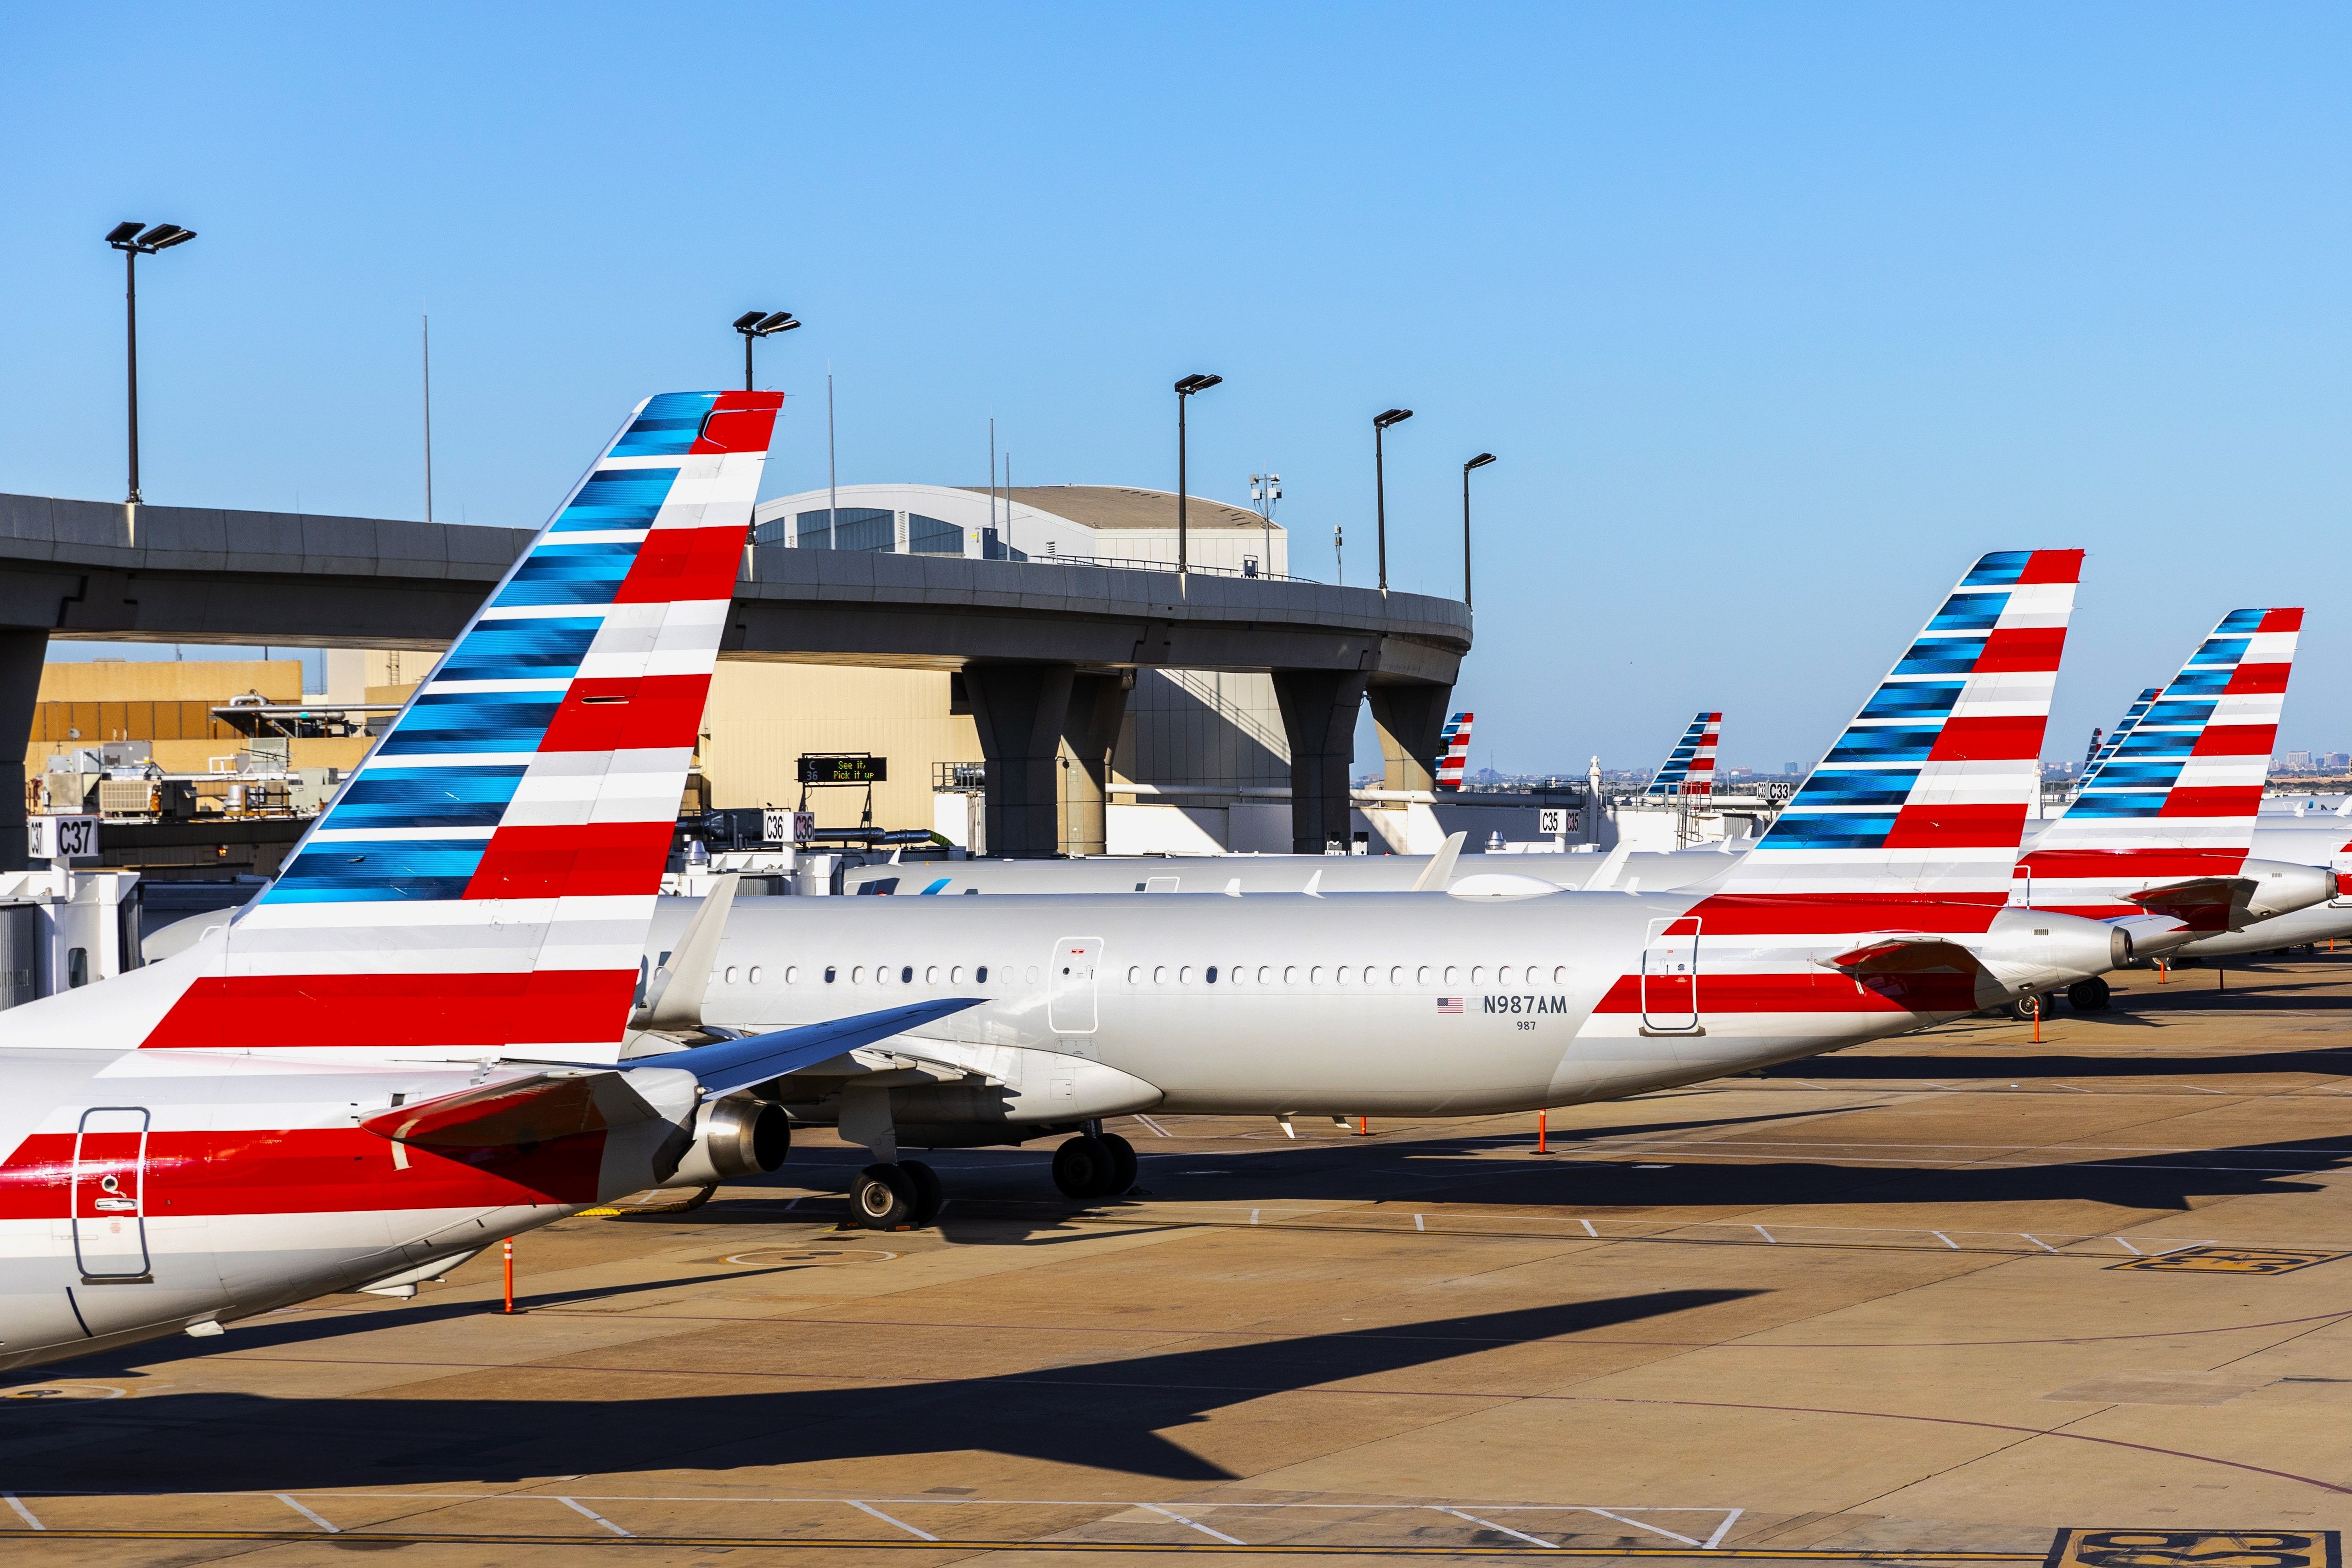 Several American Airlines Aircraft Parked at DFW